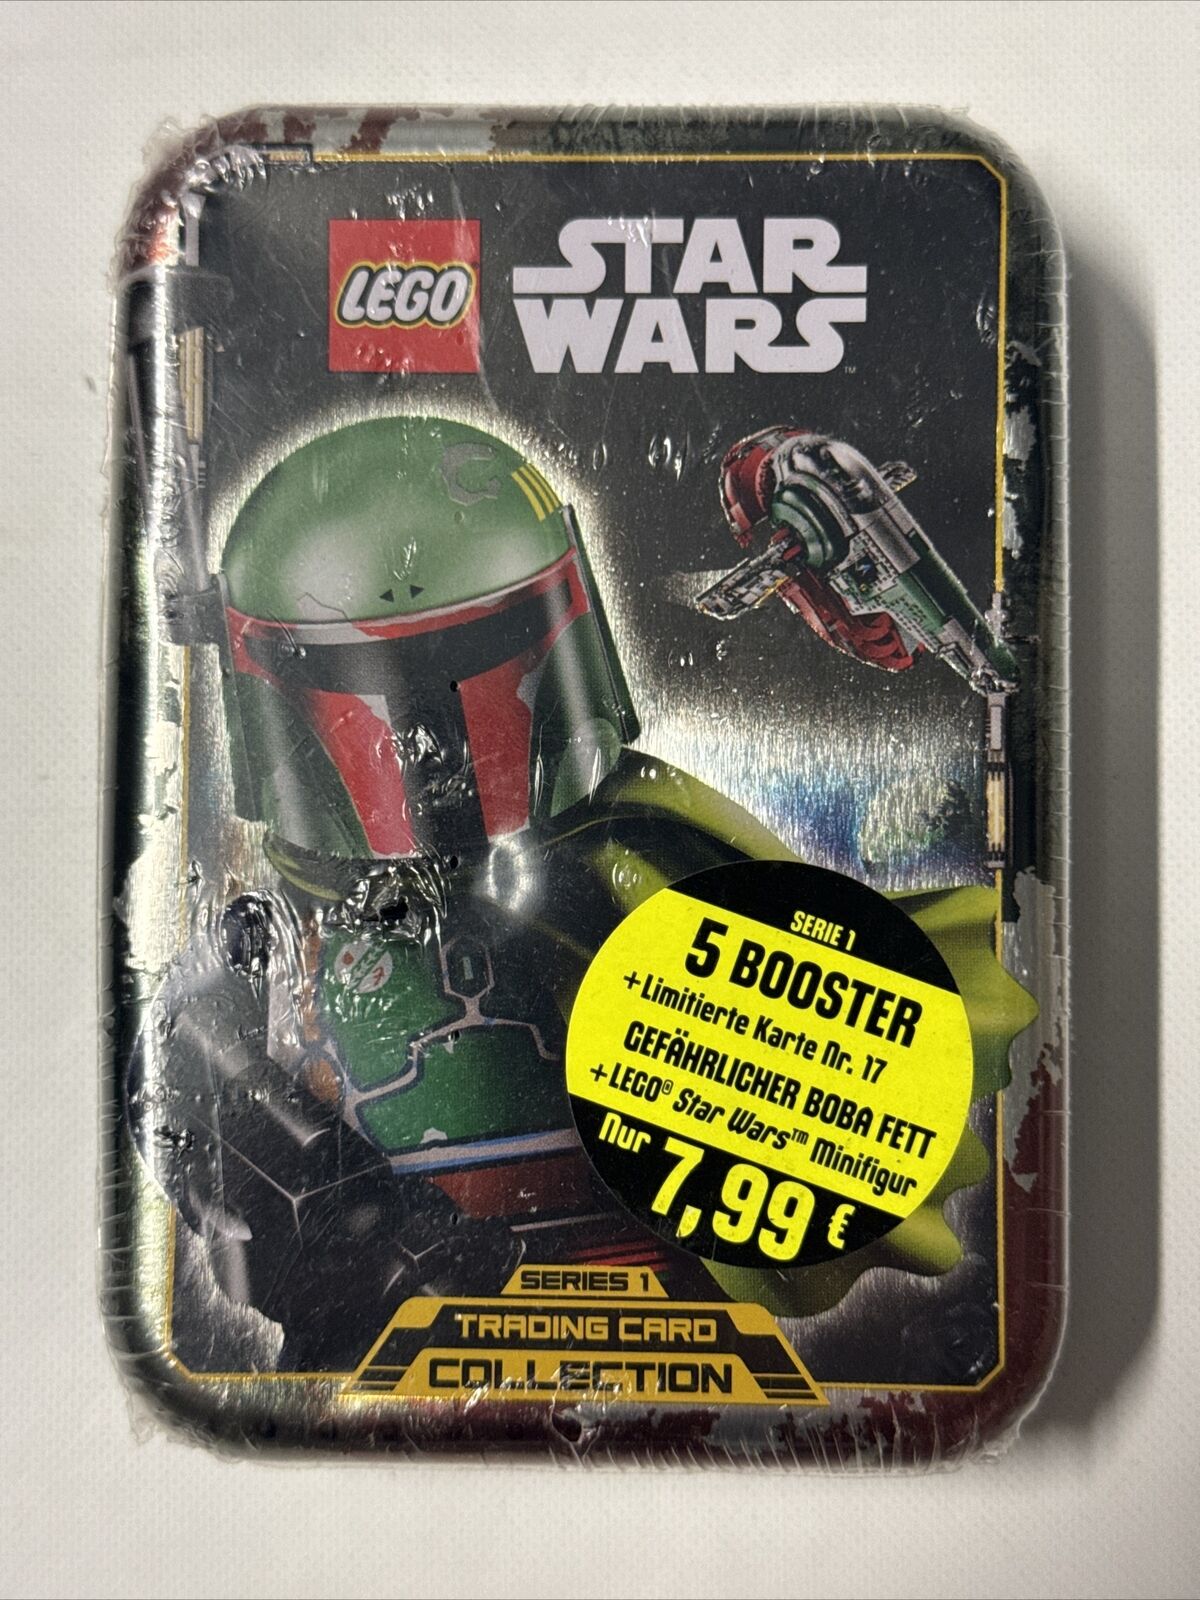 Lego Star Wars, Series 1 Trading Card Collection, Boba Fett Tin